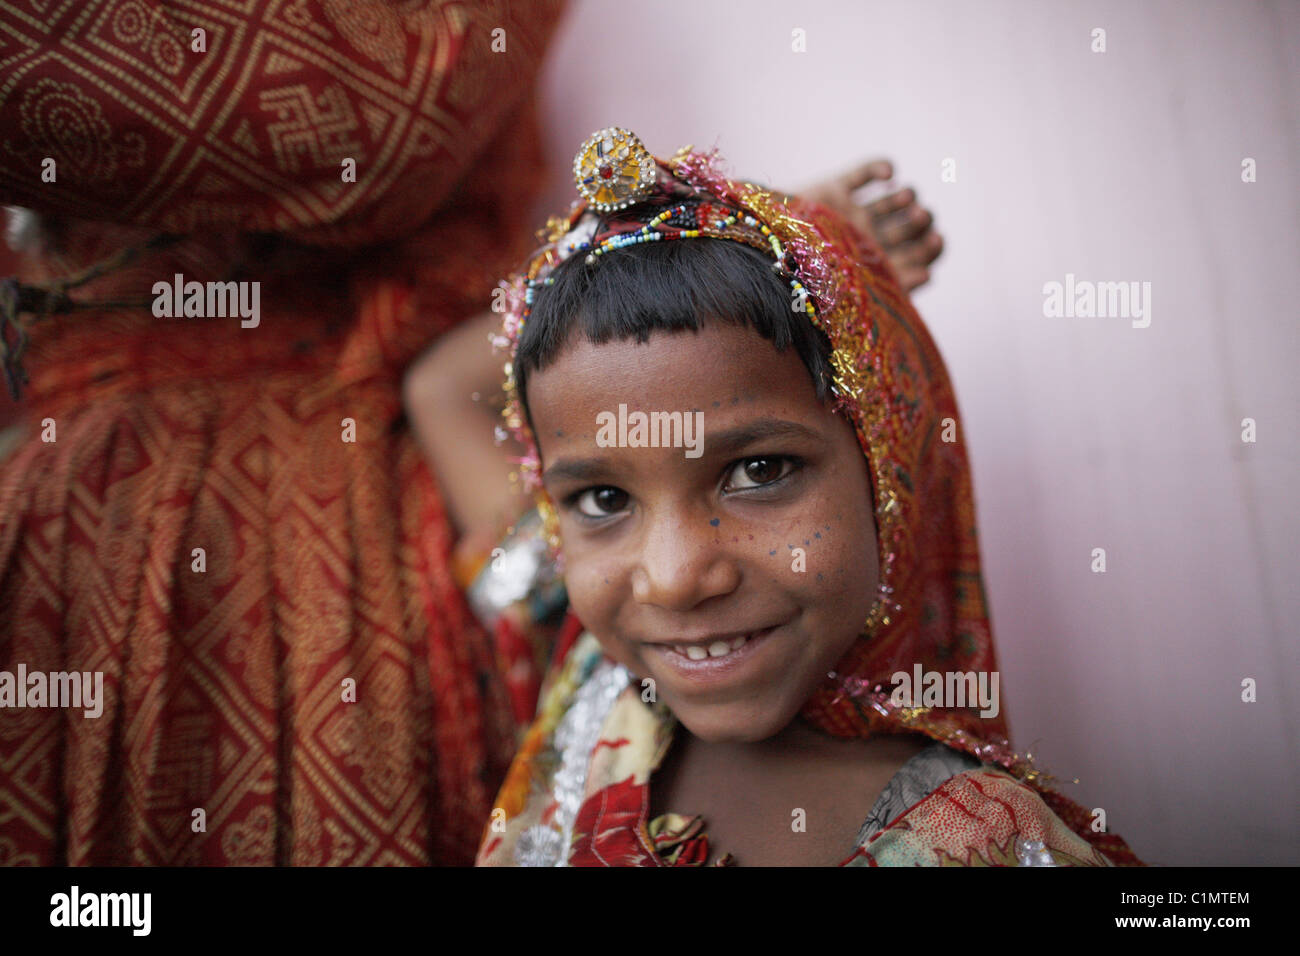 IND, India,20110310, Beautiful, cut, little girl with traditional costume Stock Photo